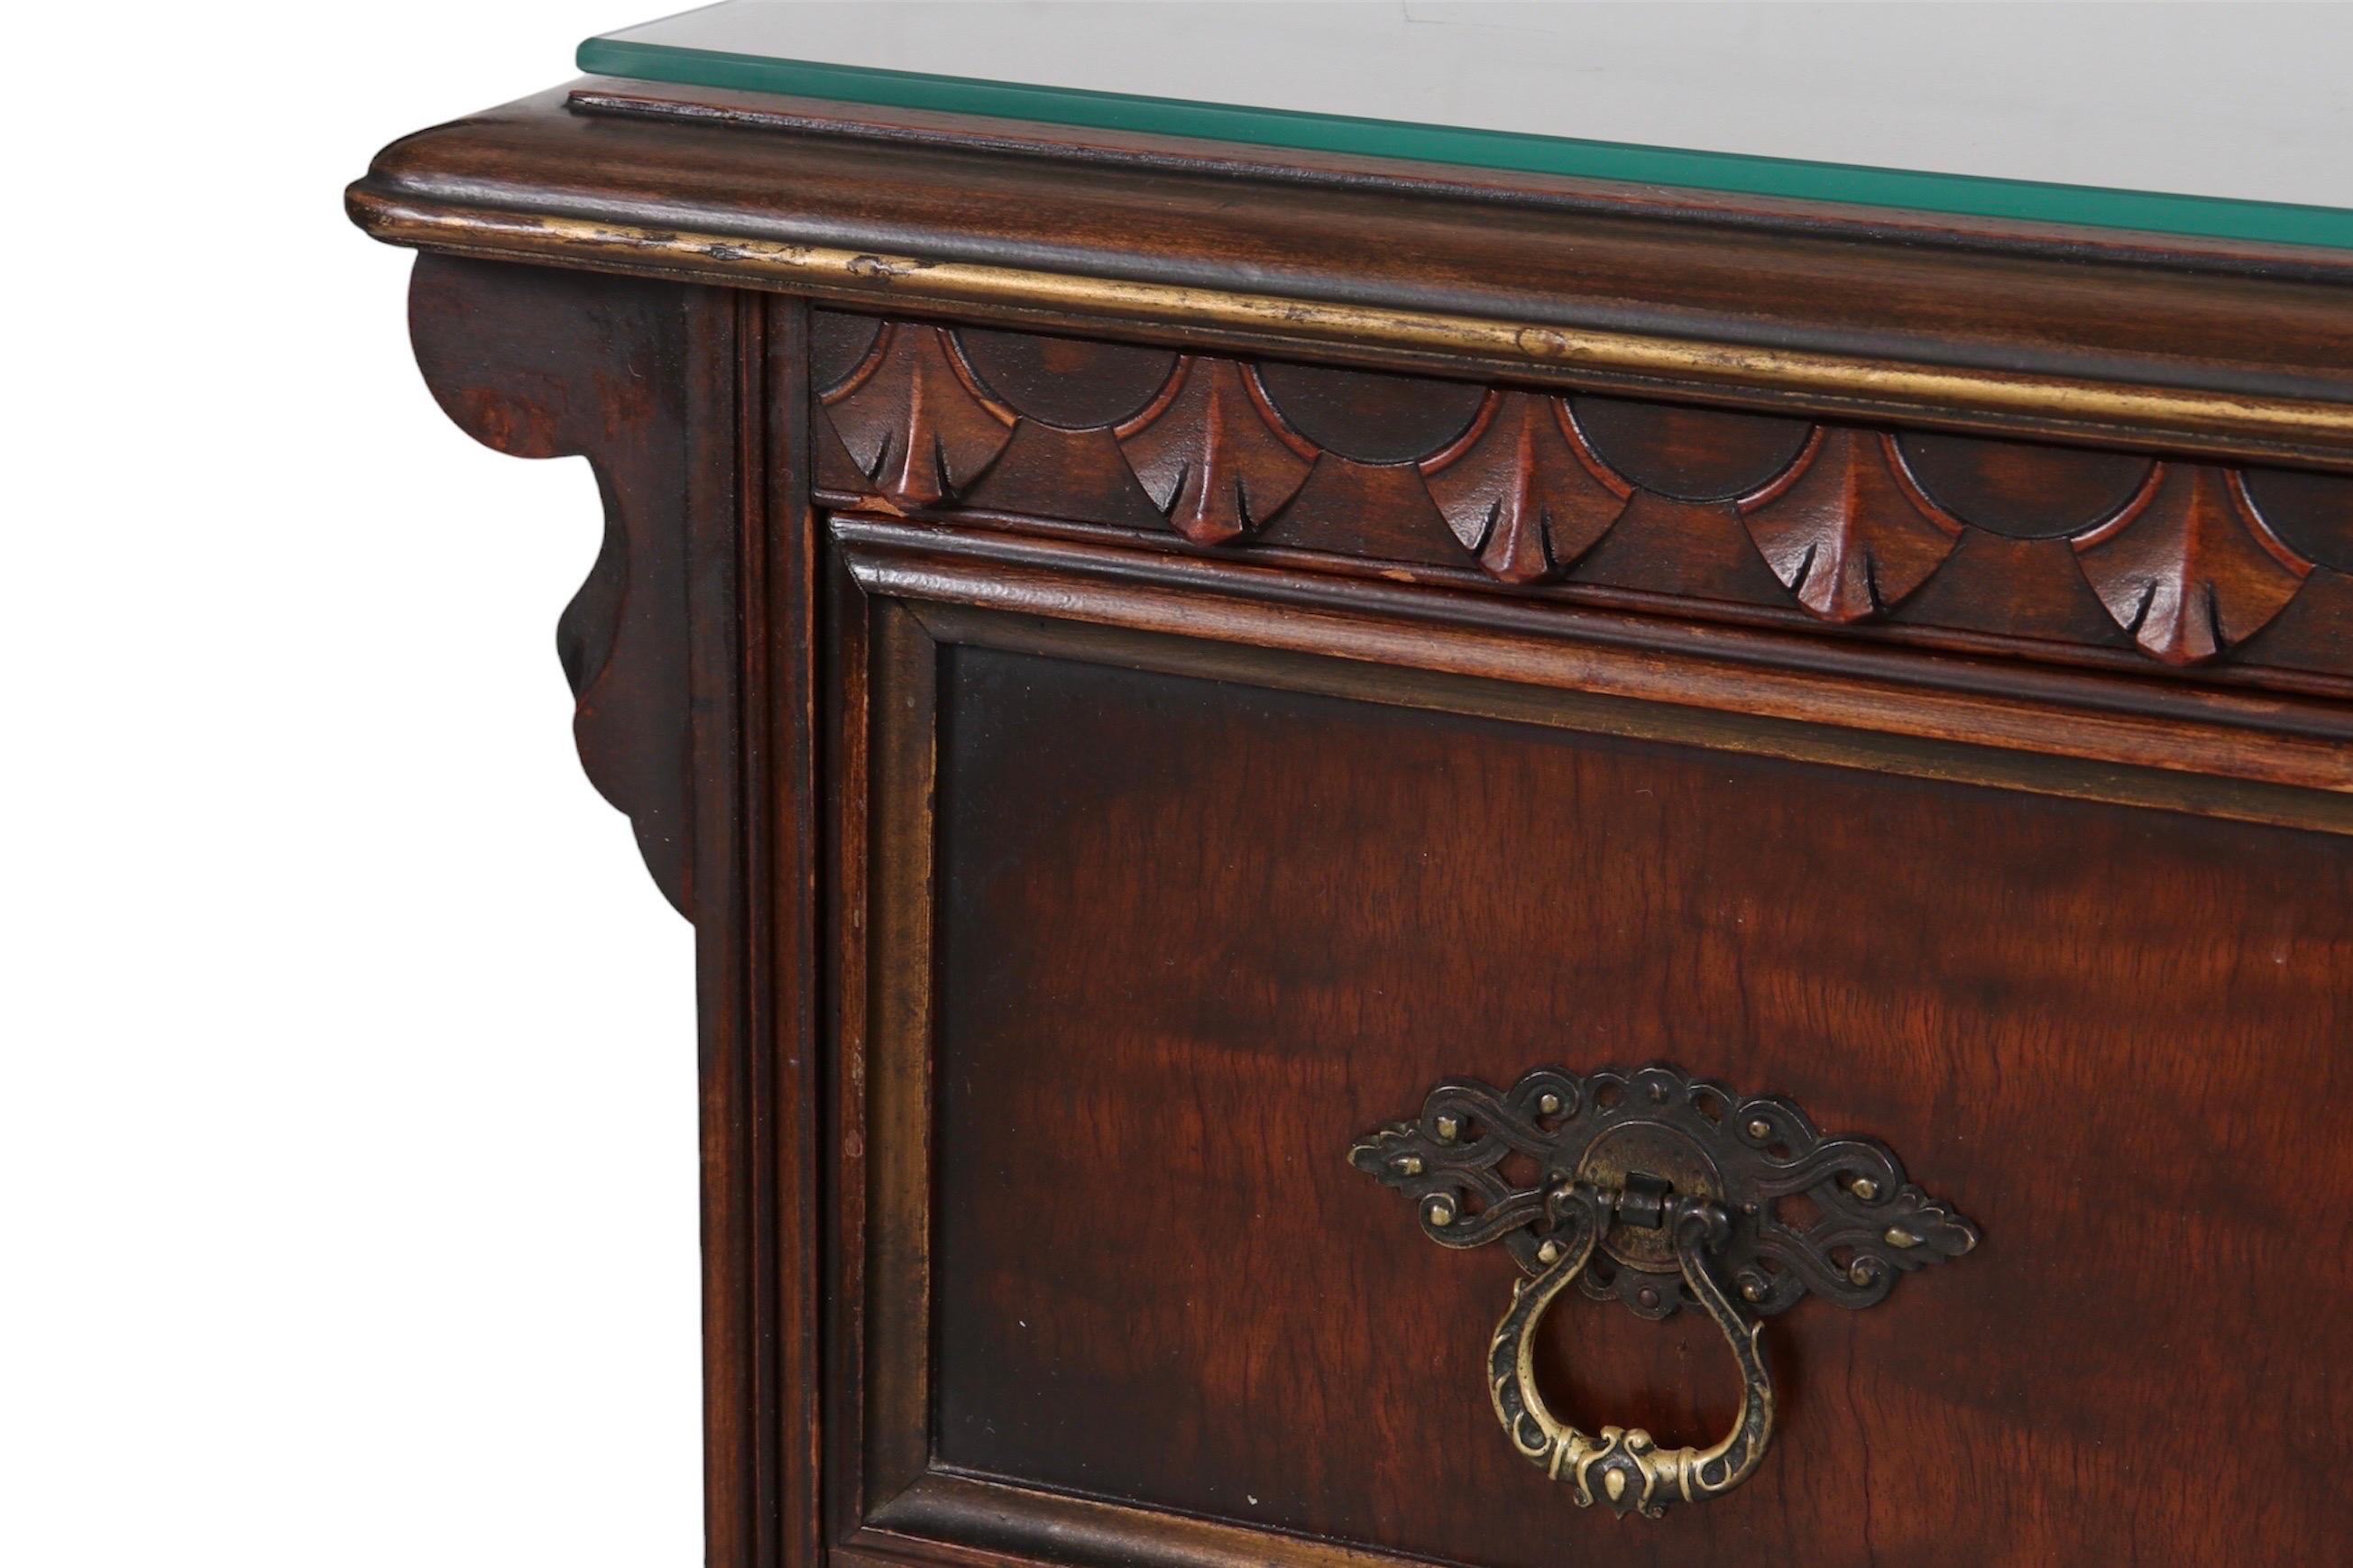 A Berkey and Gay painted chest in walnut, with a protective glass top. Two over two dovetailed drawers are framed with ornate carved moldings. The lower drawers give the look of four with a center panel, decorated with a gilt stenciled plant that